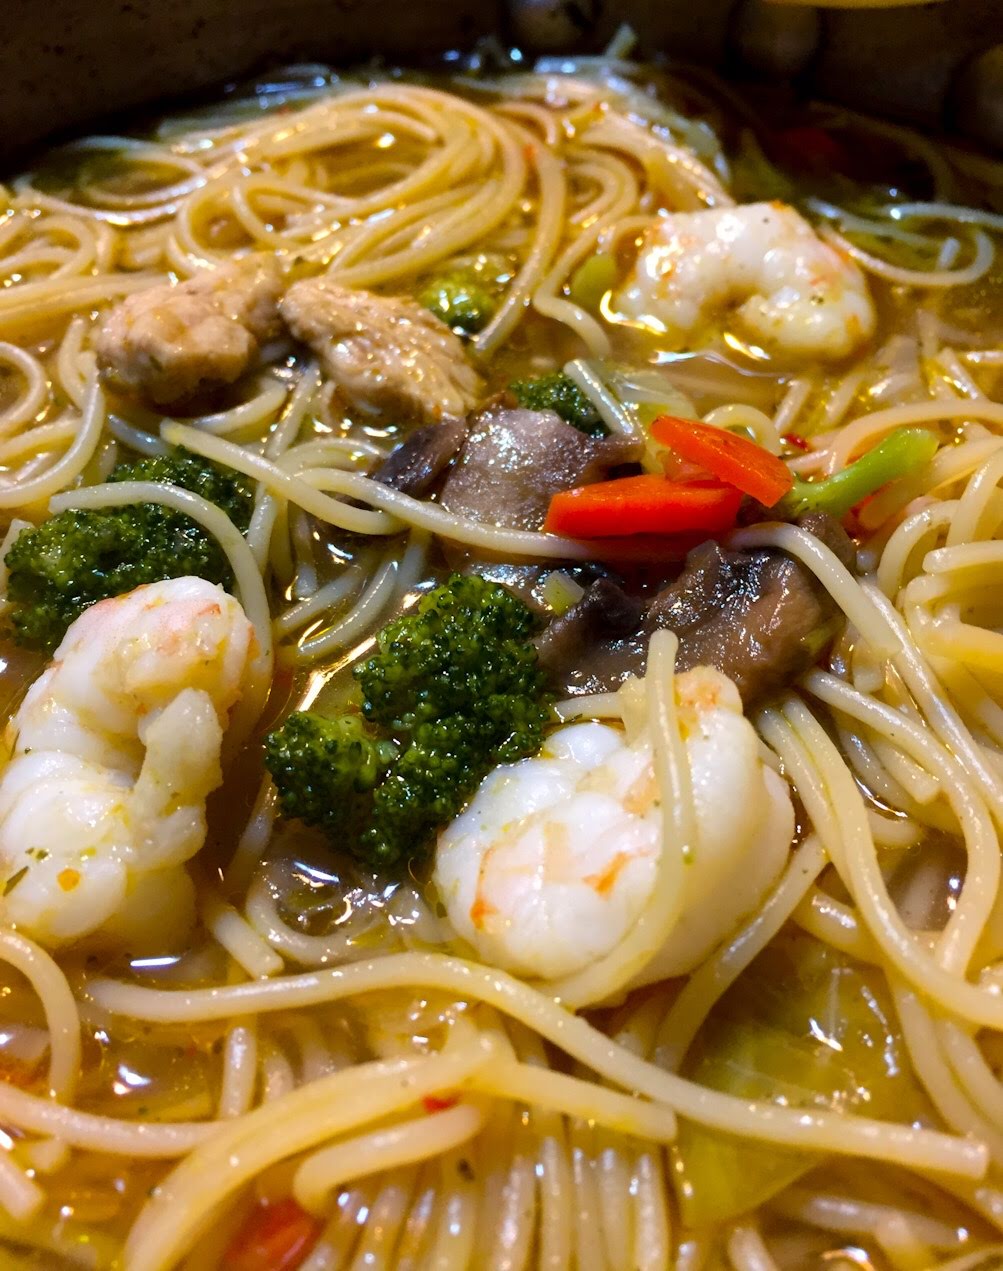 Ain't no cooking like Momma's: Spicy Thai Chicken and Shrimp Noodle Soup